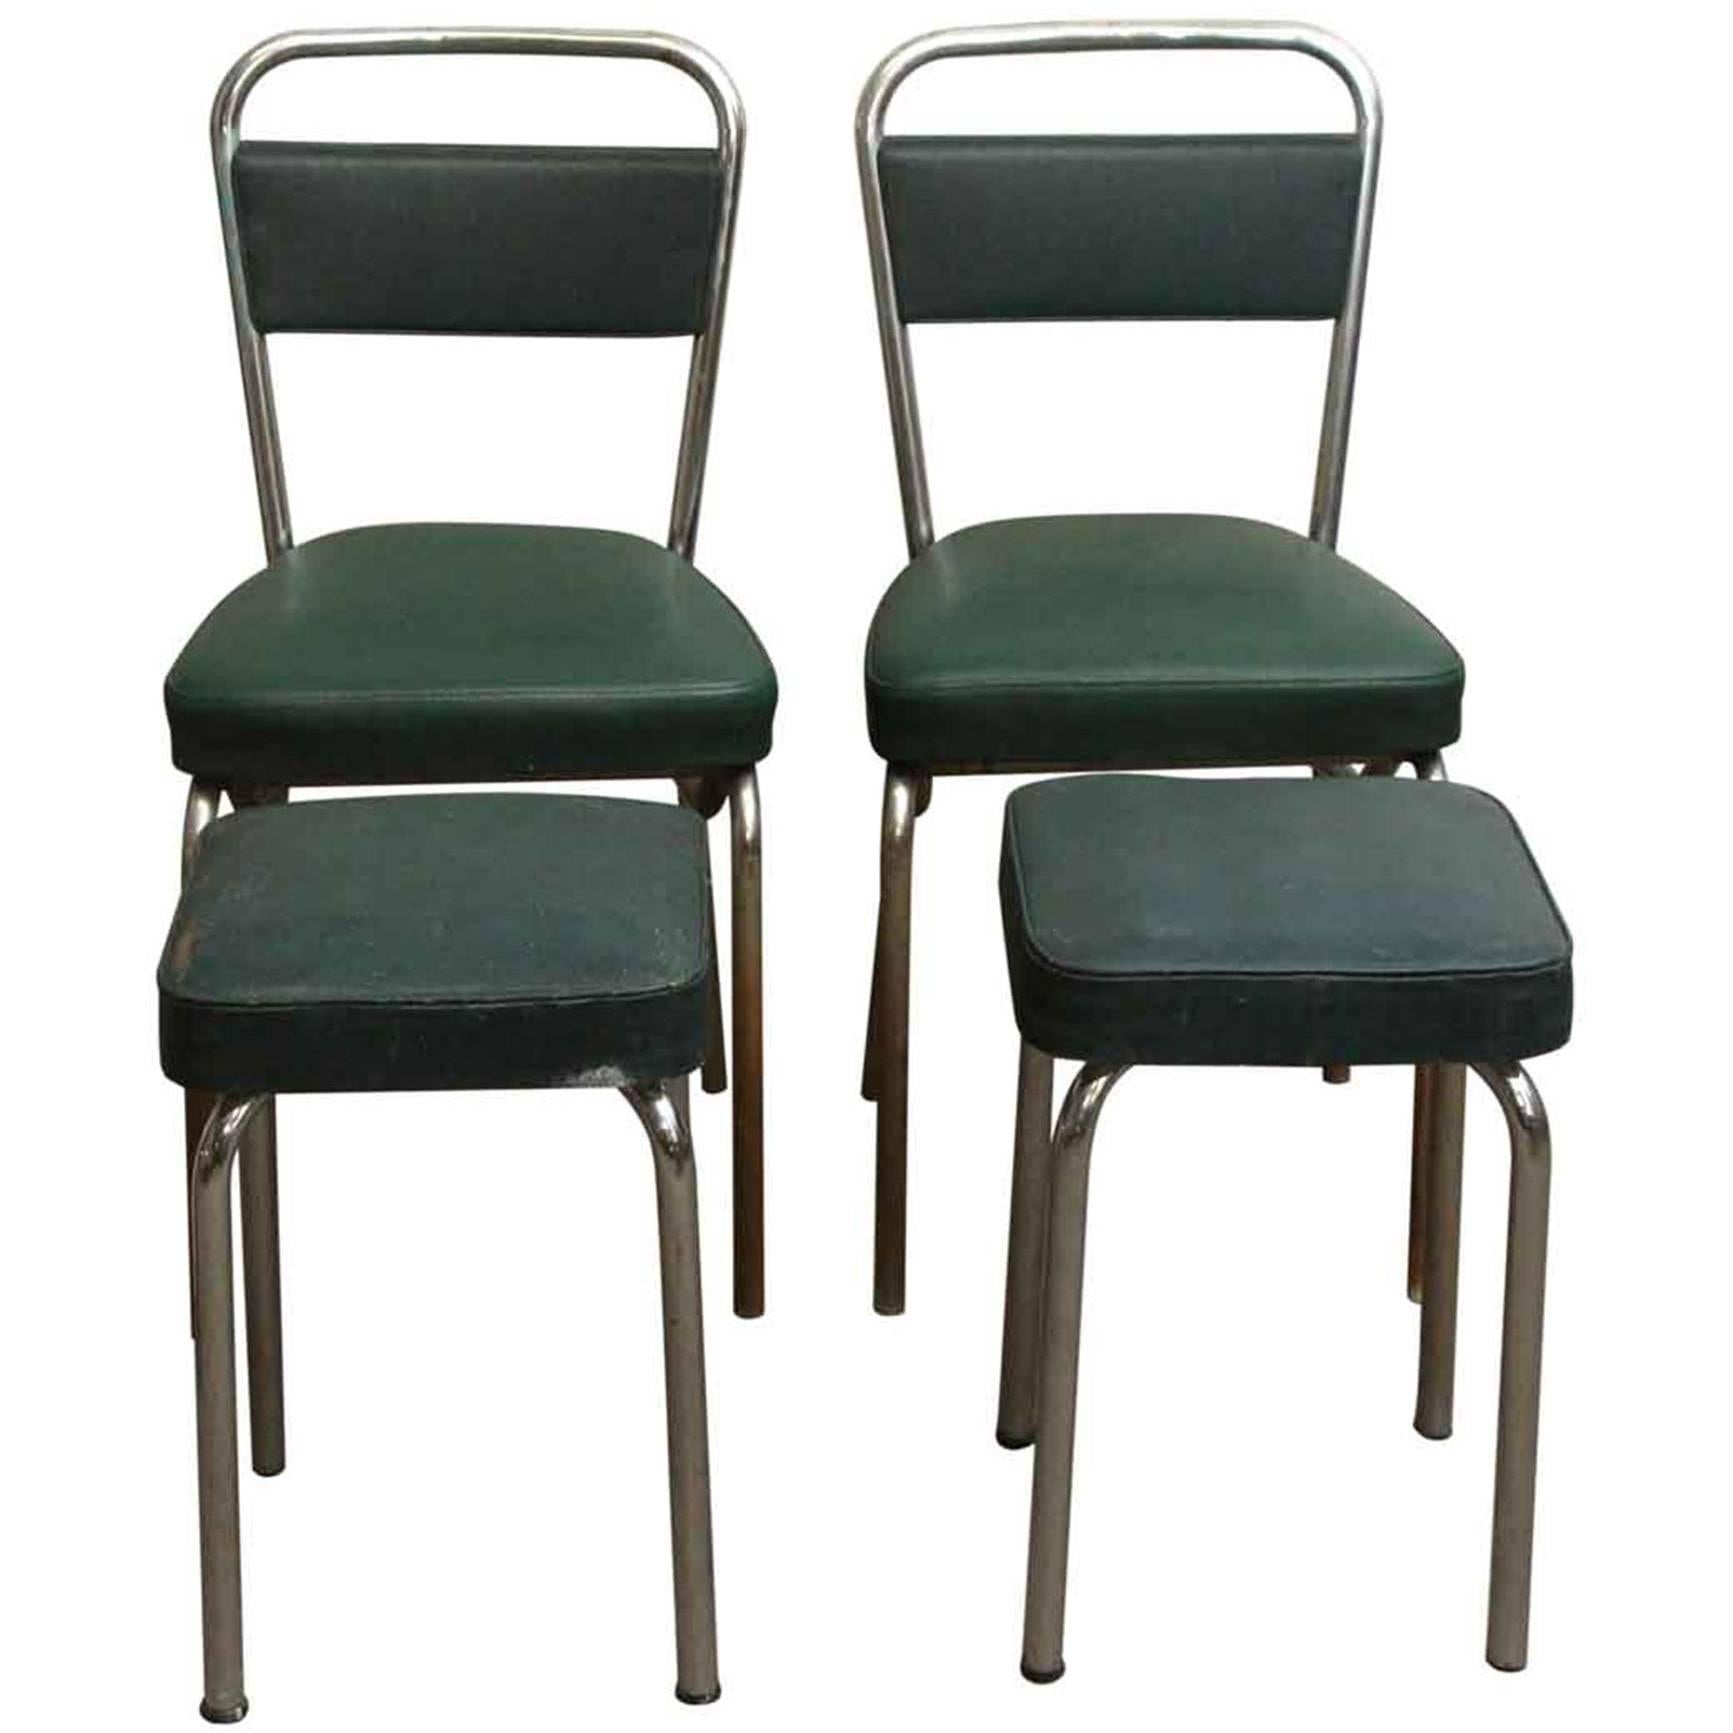 French Strafor Dark Green and Chrome Chair and Stool Set